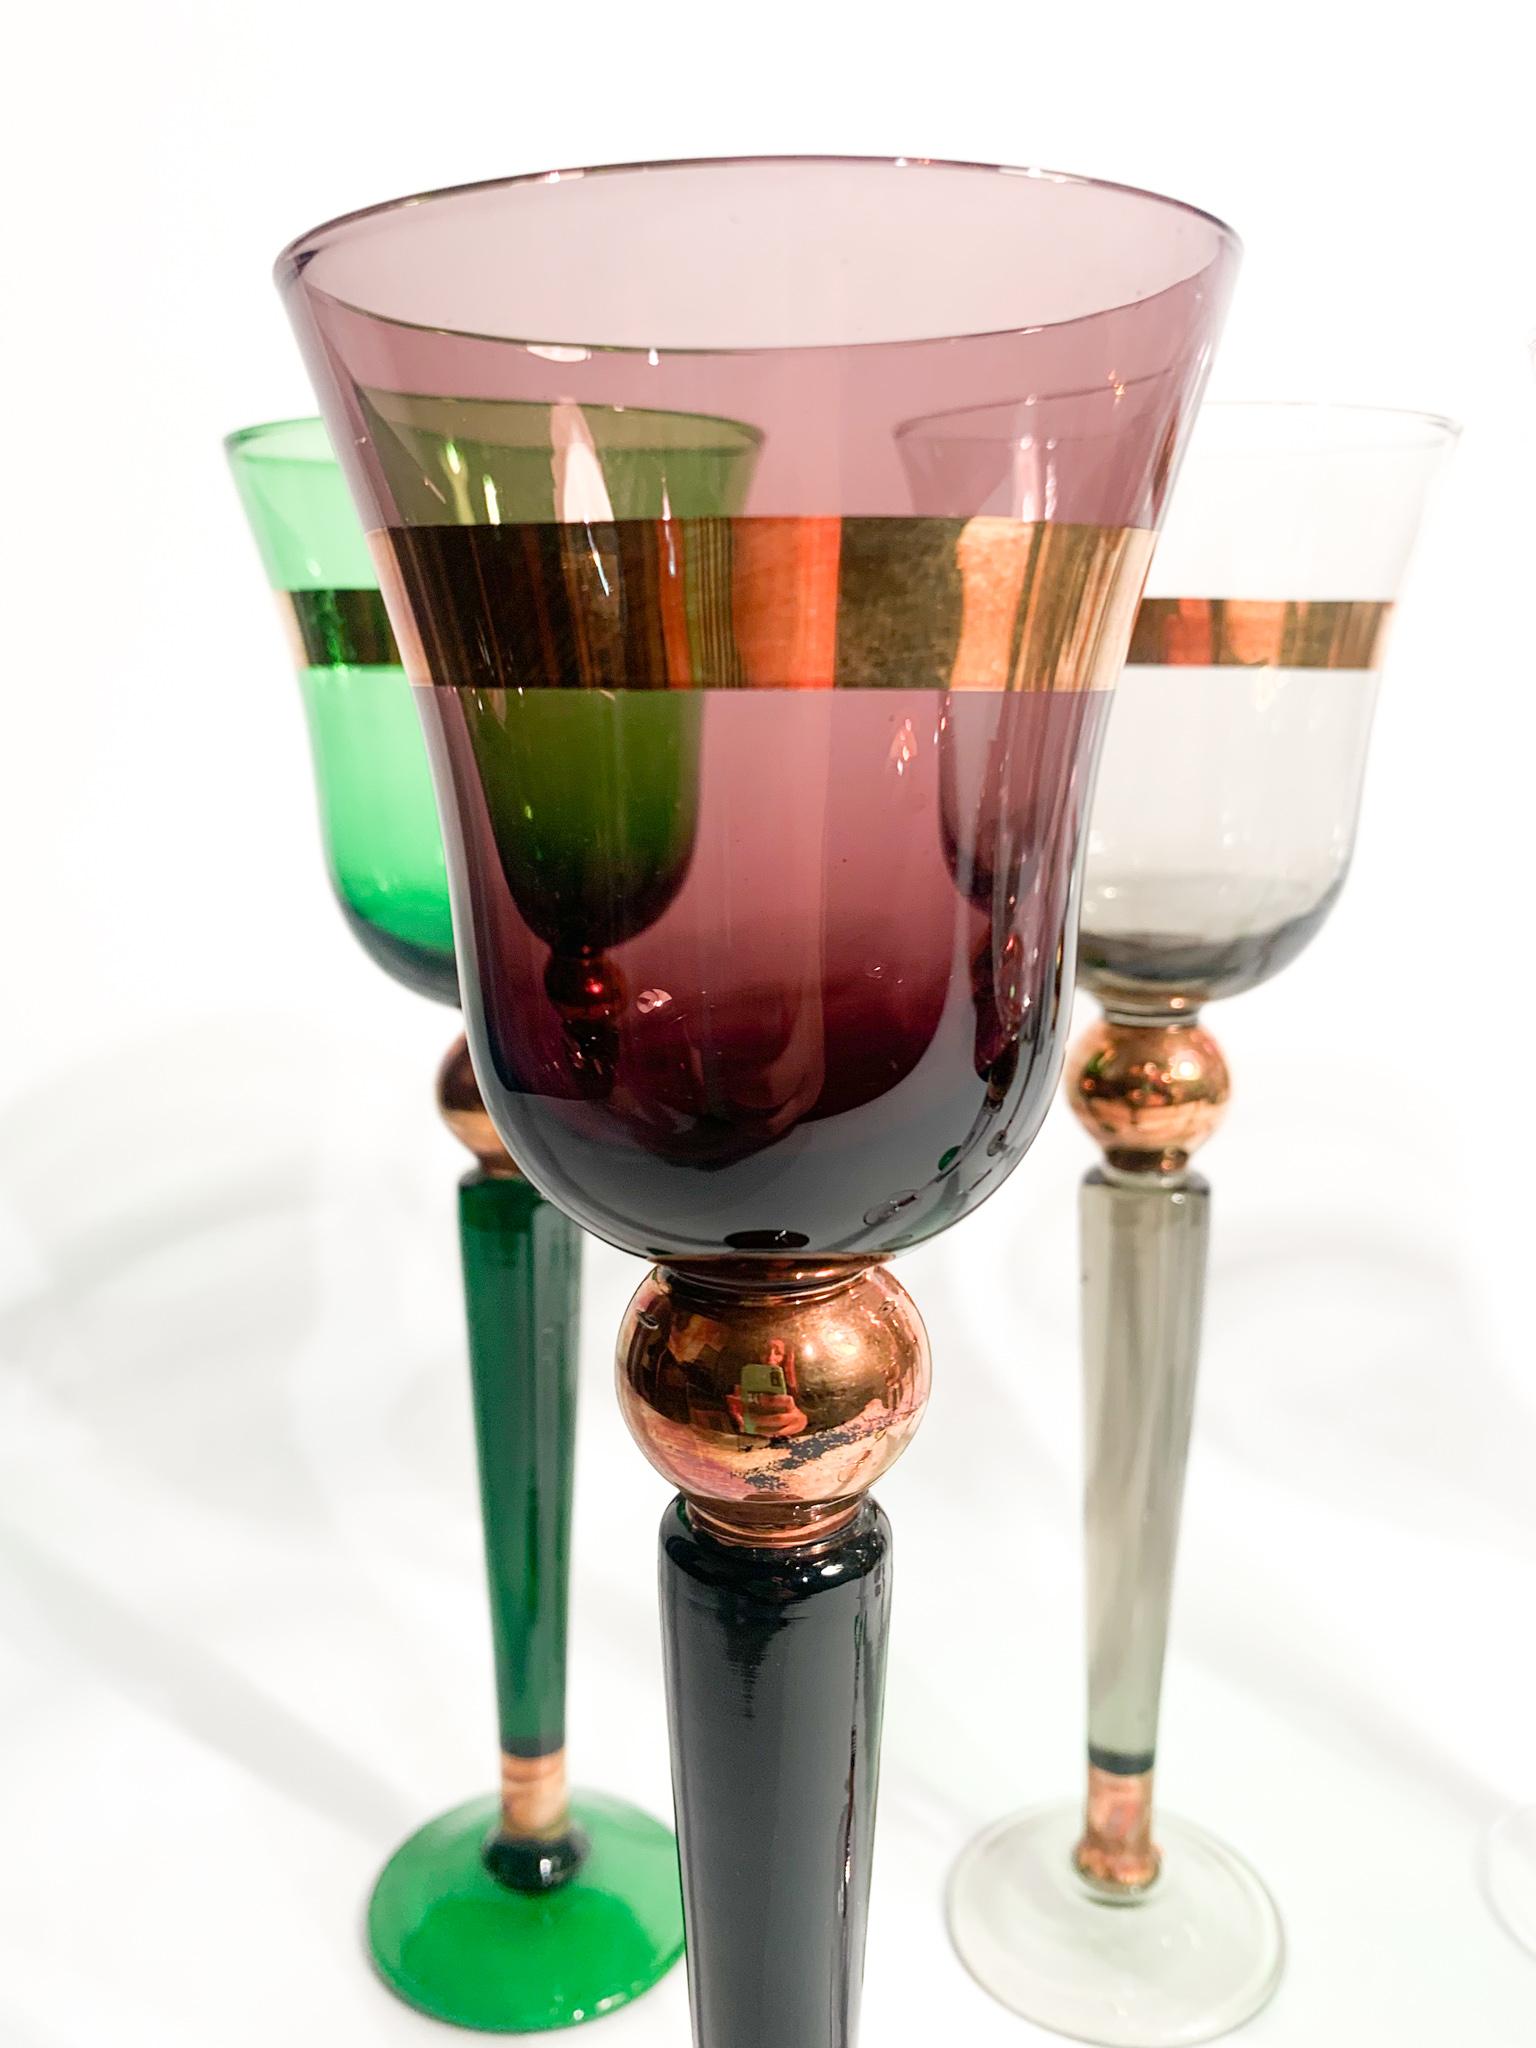 Set of 6 Venini Multicolored Murano Glass Goblets from the 1950s For Sale 8